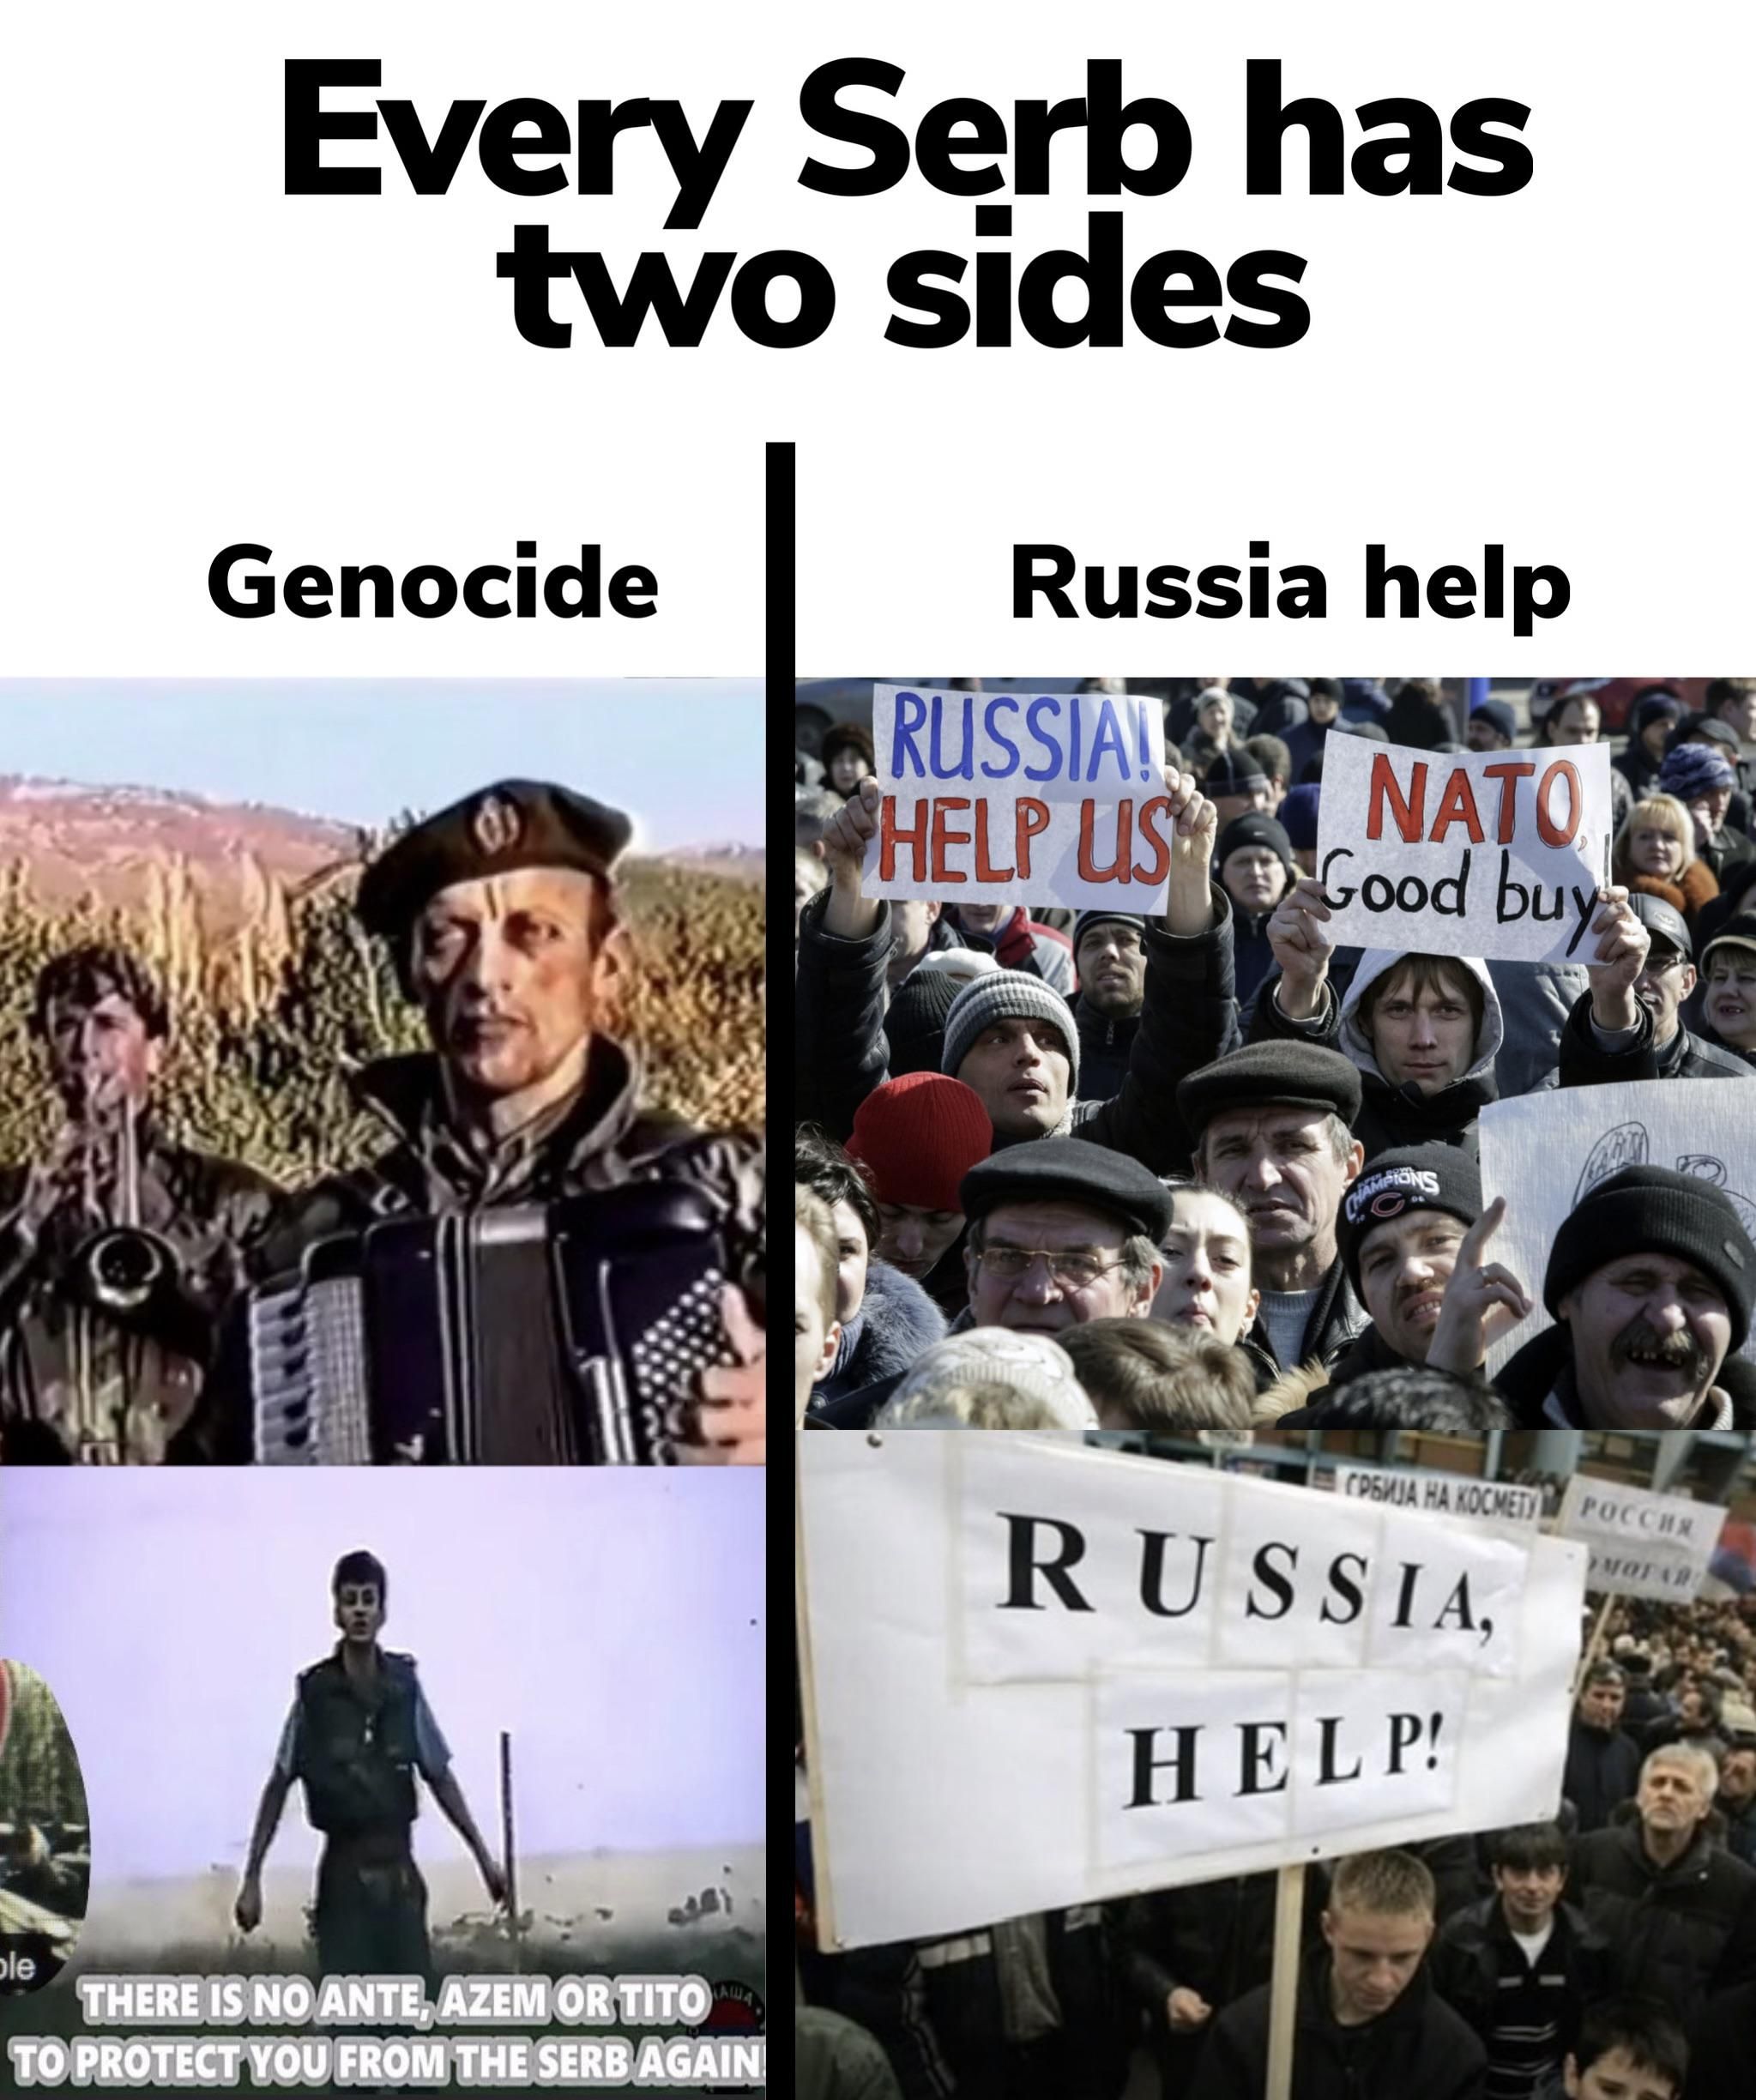 Every Serb has two sides